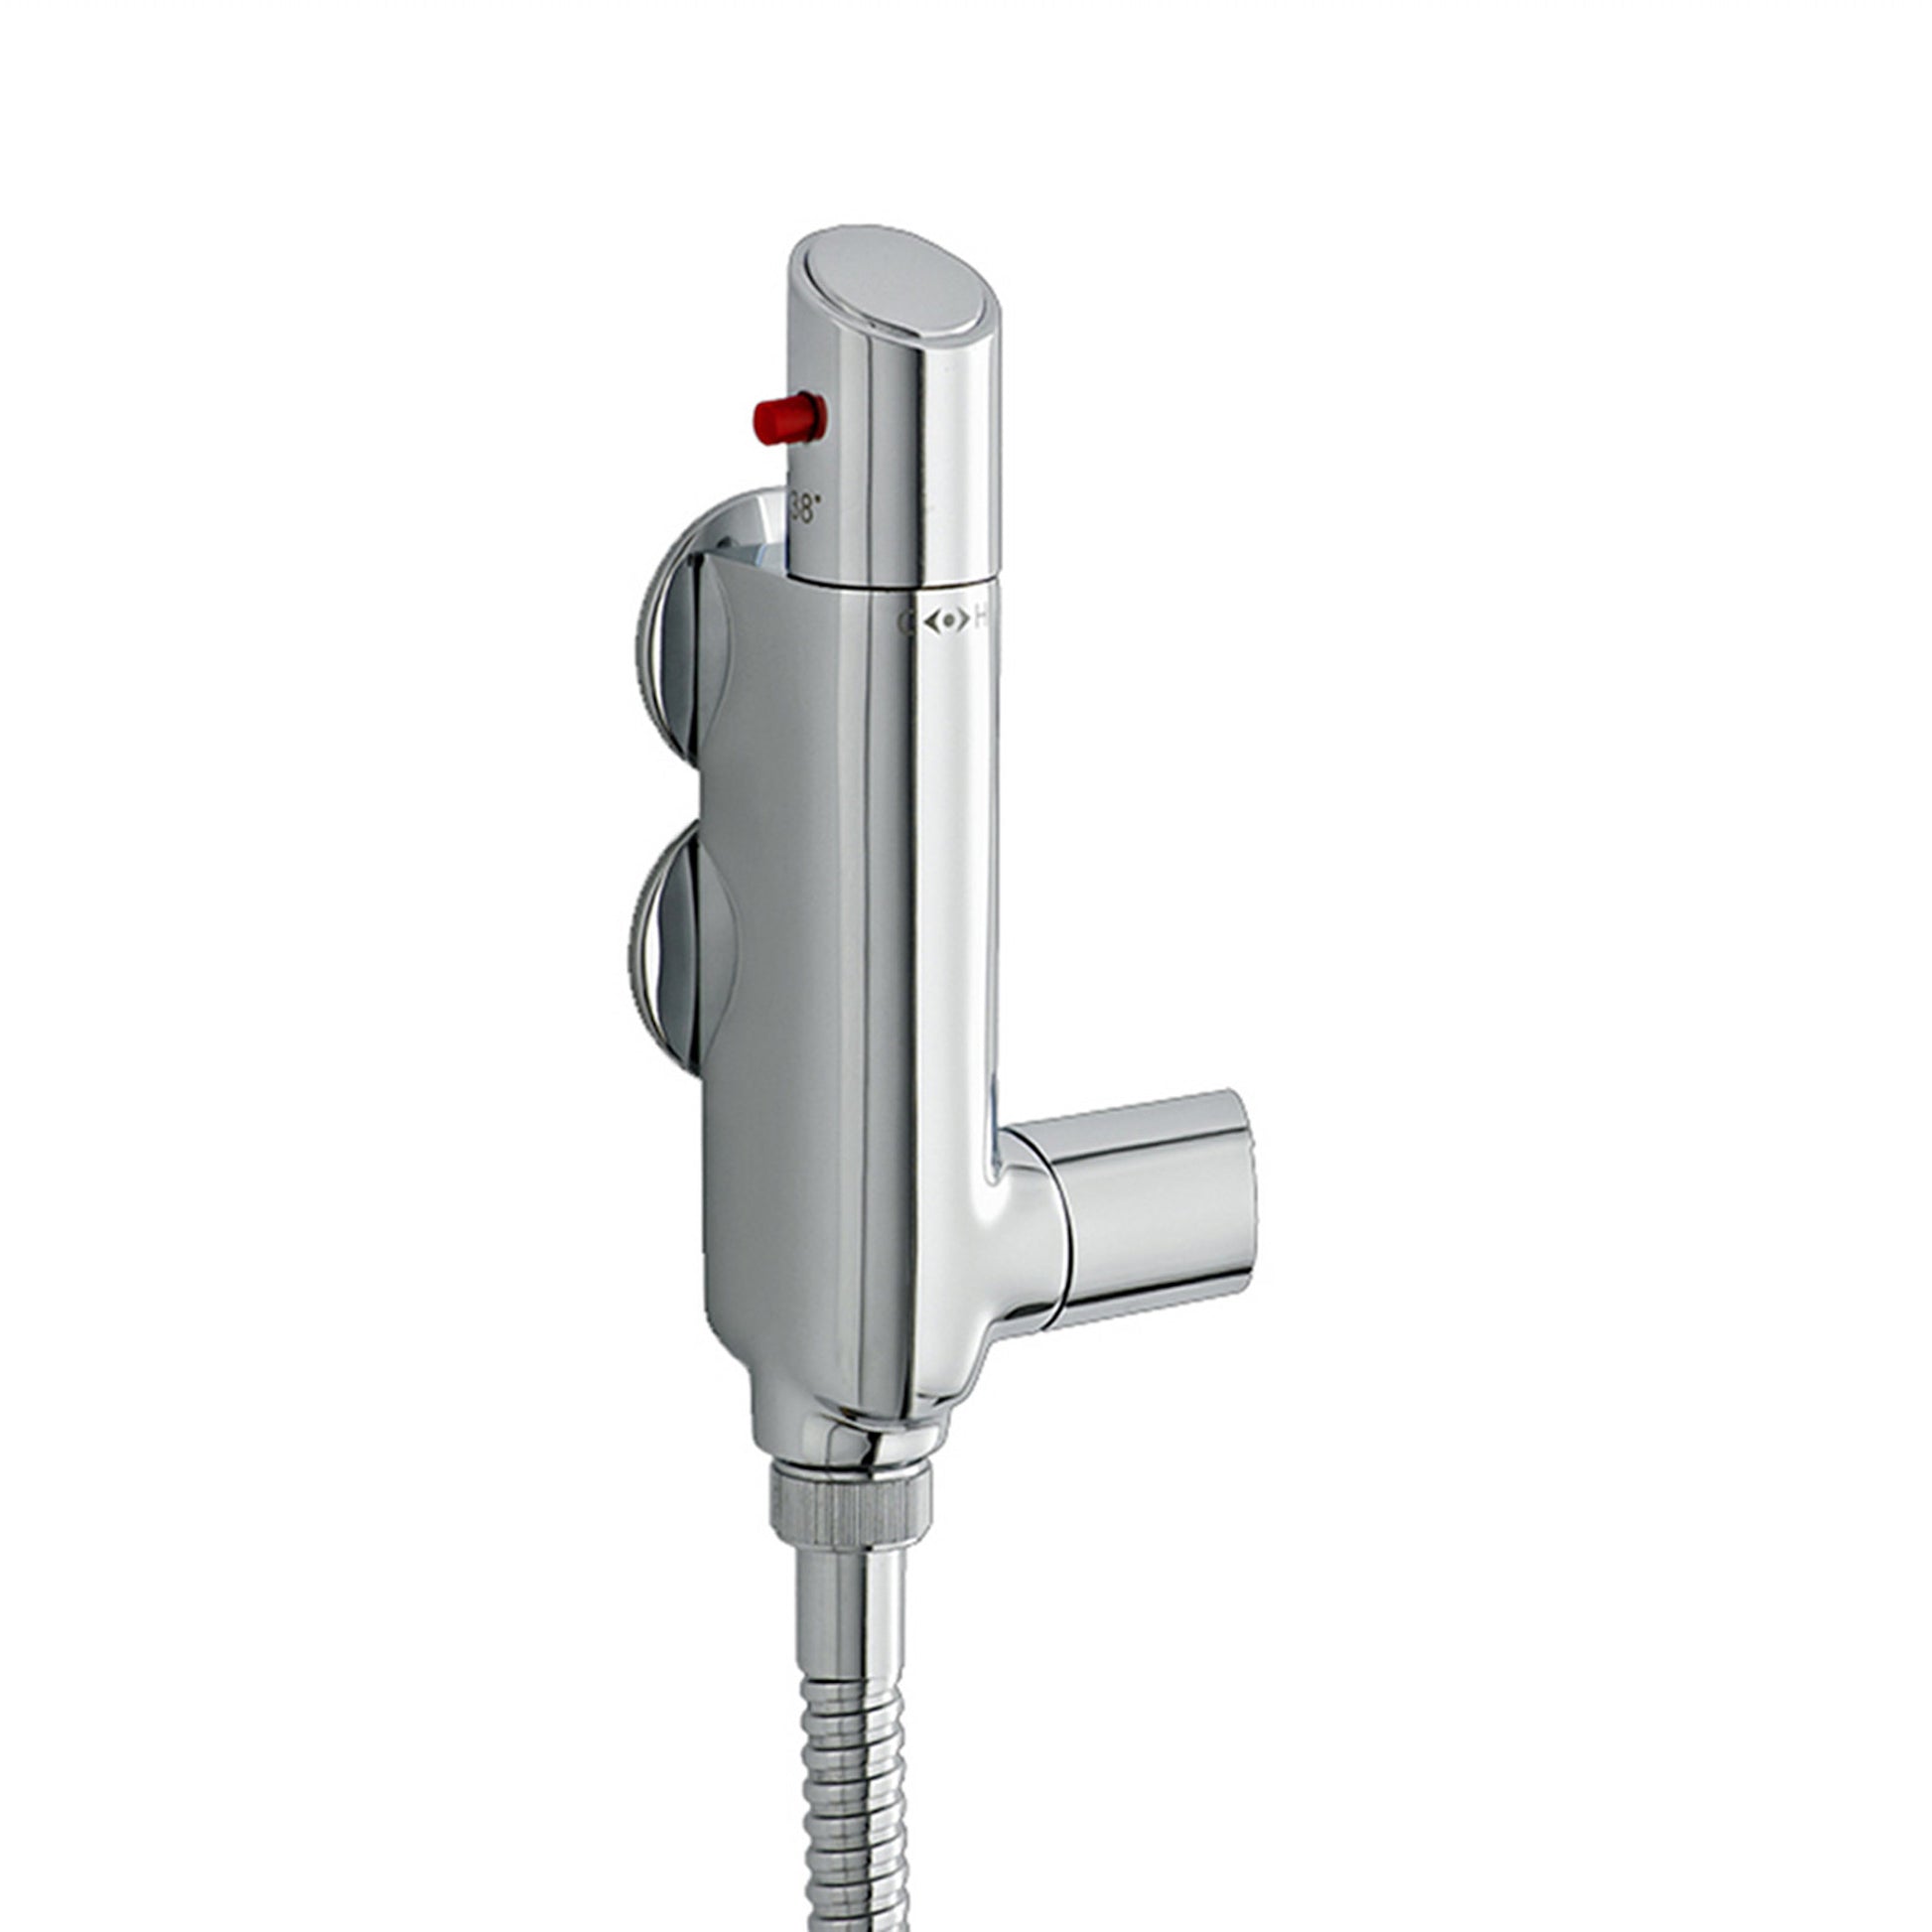 Vito Vertical Thermostatic Shower Bar Mixer Valve Tap With Contemporary Douche Bidet Handshower Spray Kit - Chrome - Showers